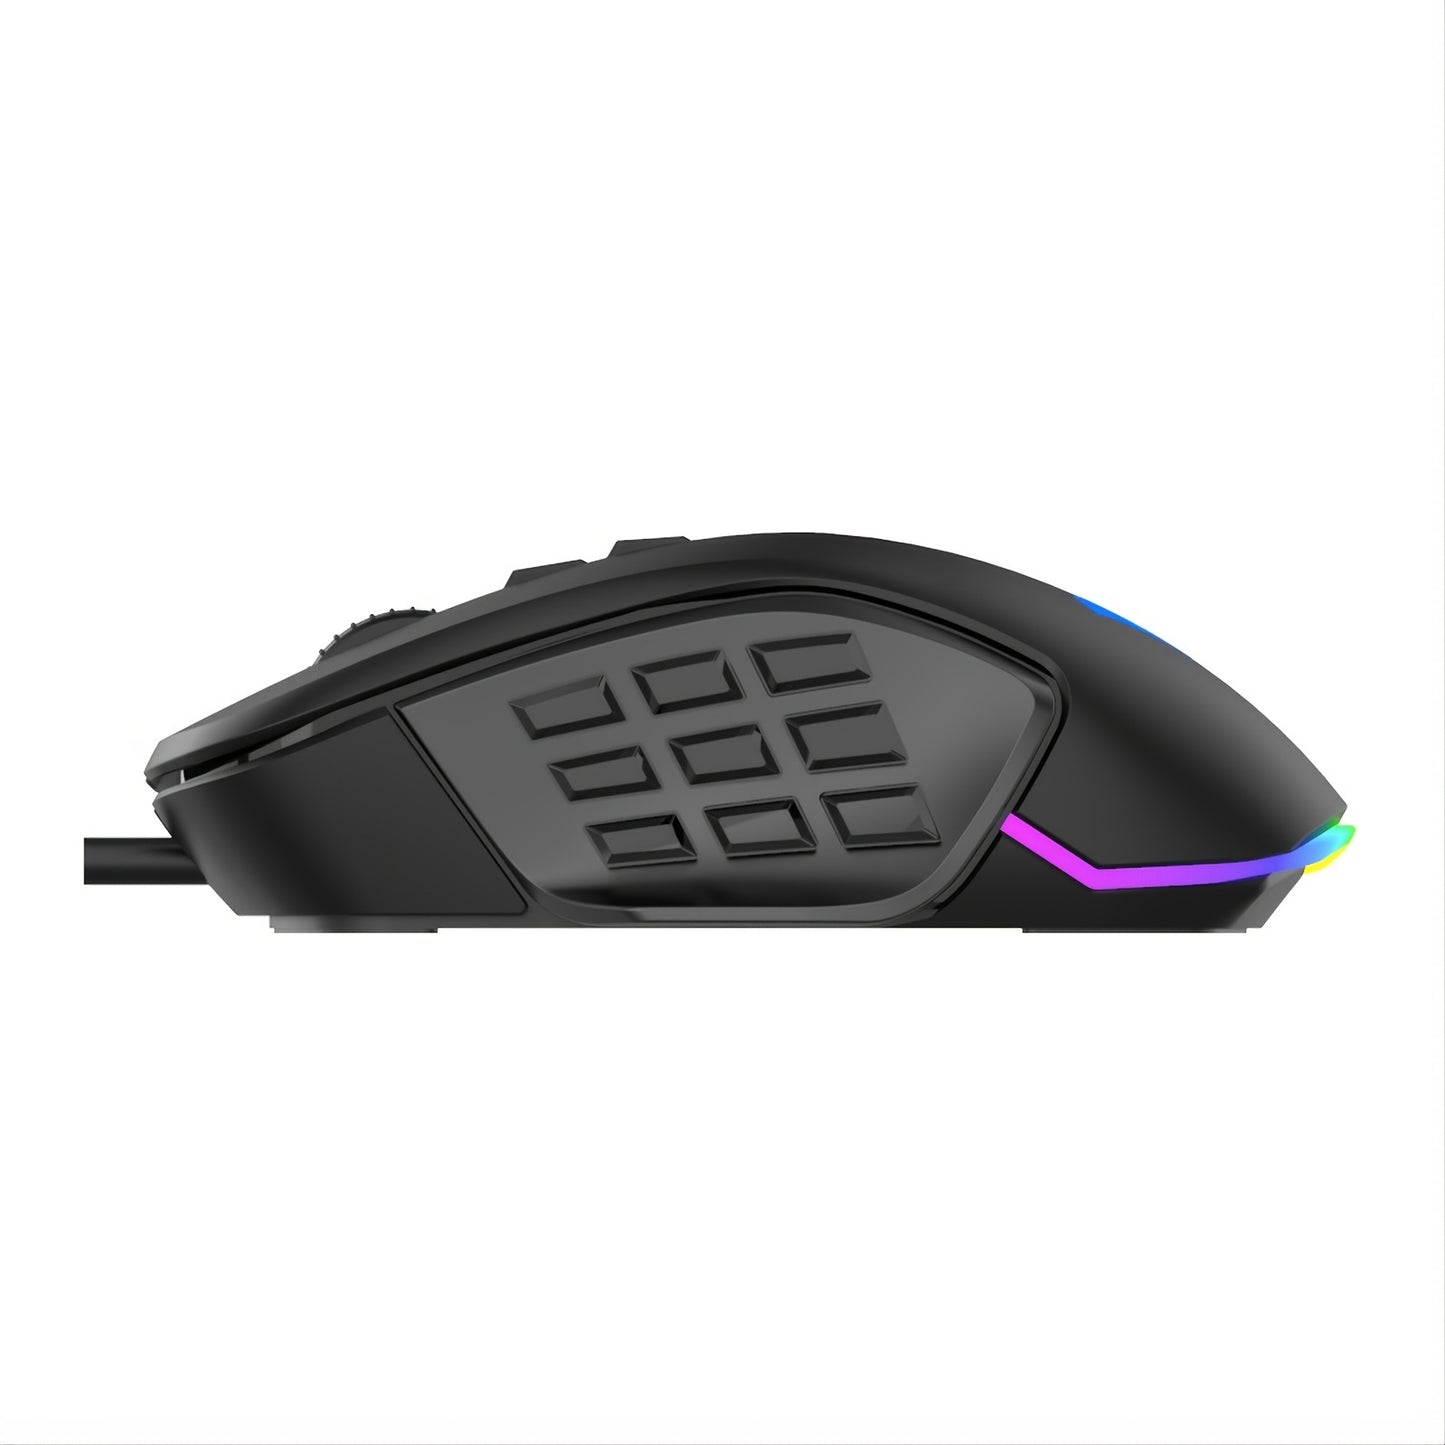 RGB Gaming Mouse Optical For Desktop